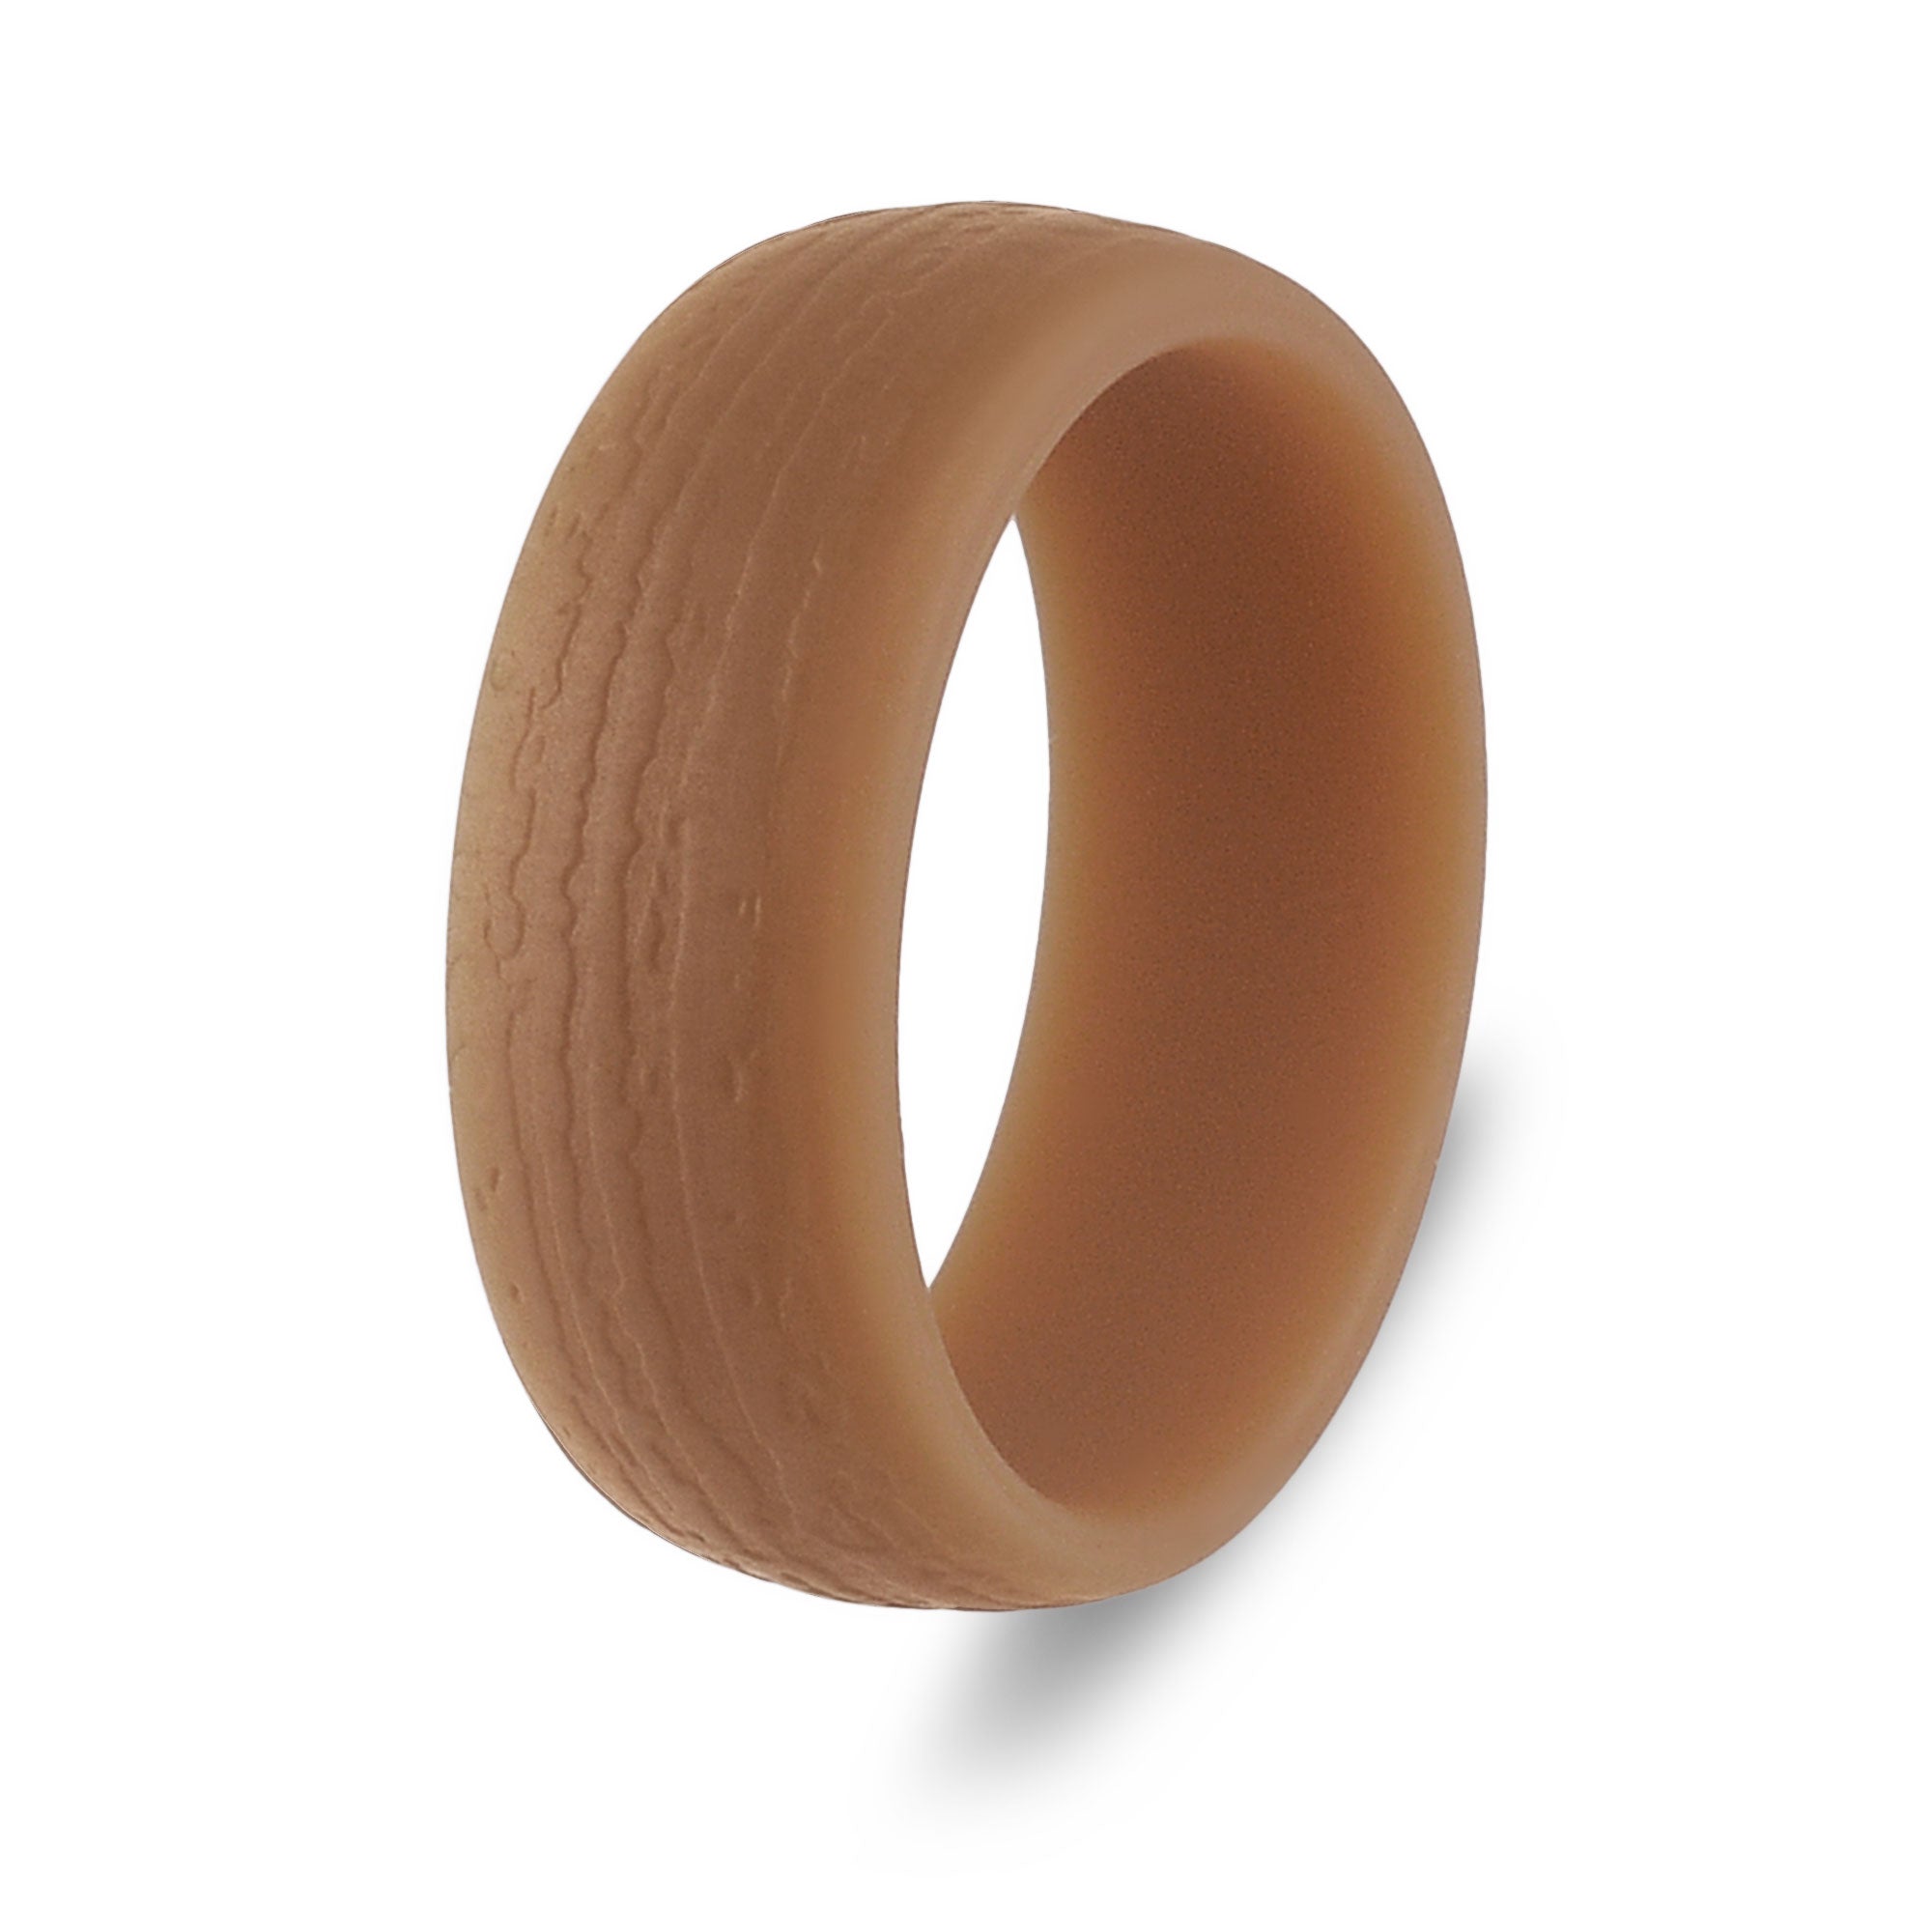 The Amber - Silicone Ring